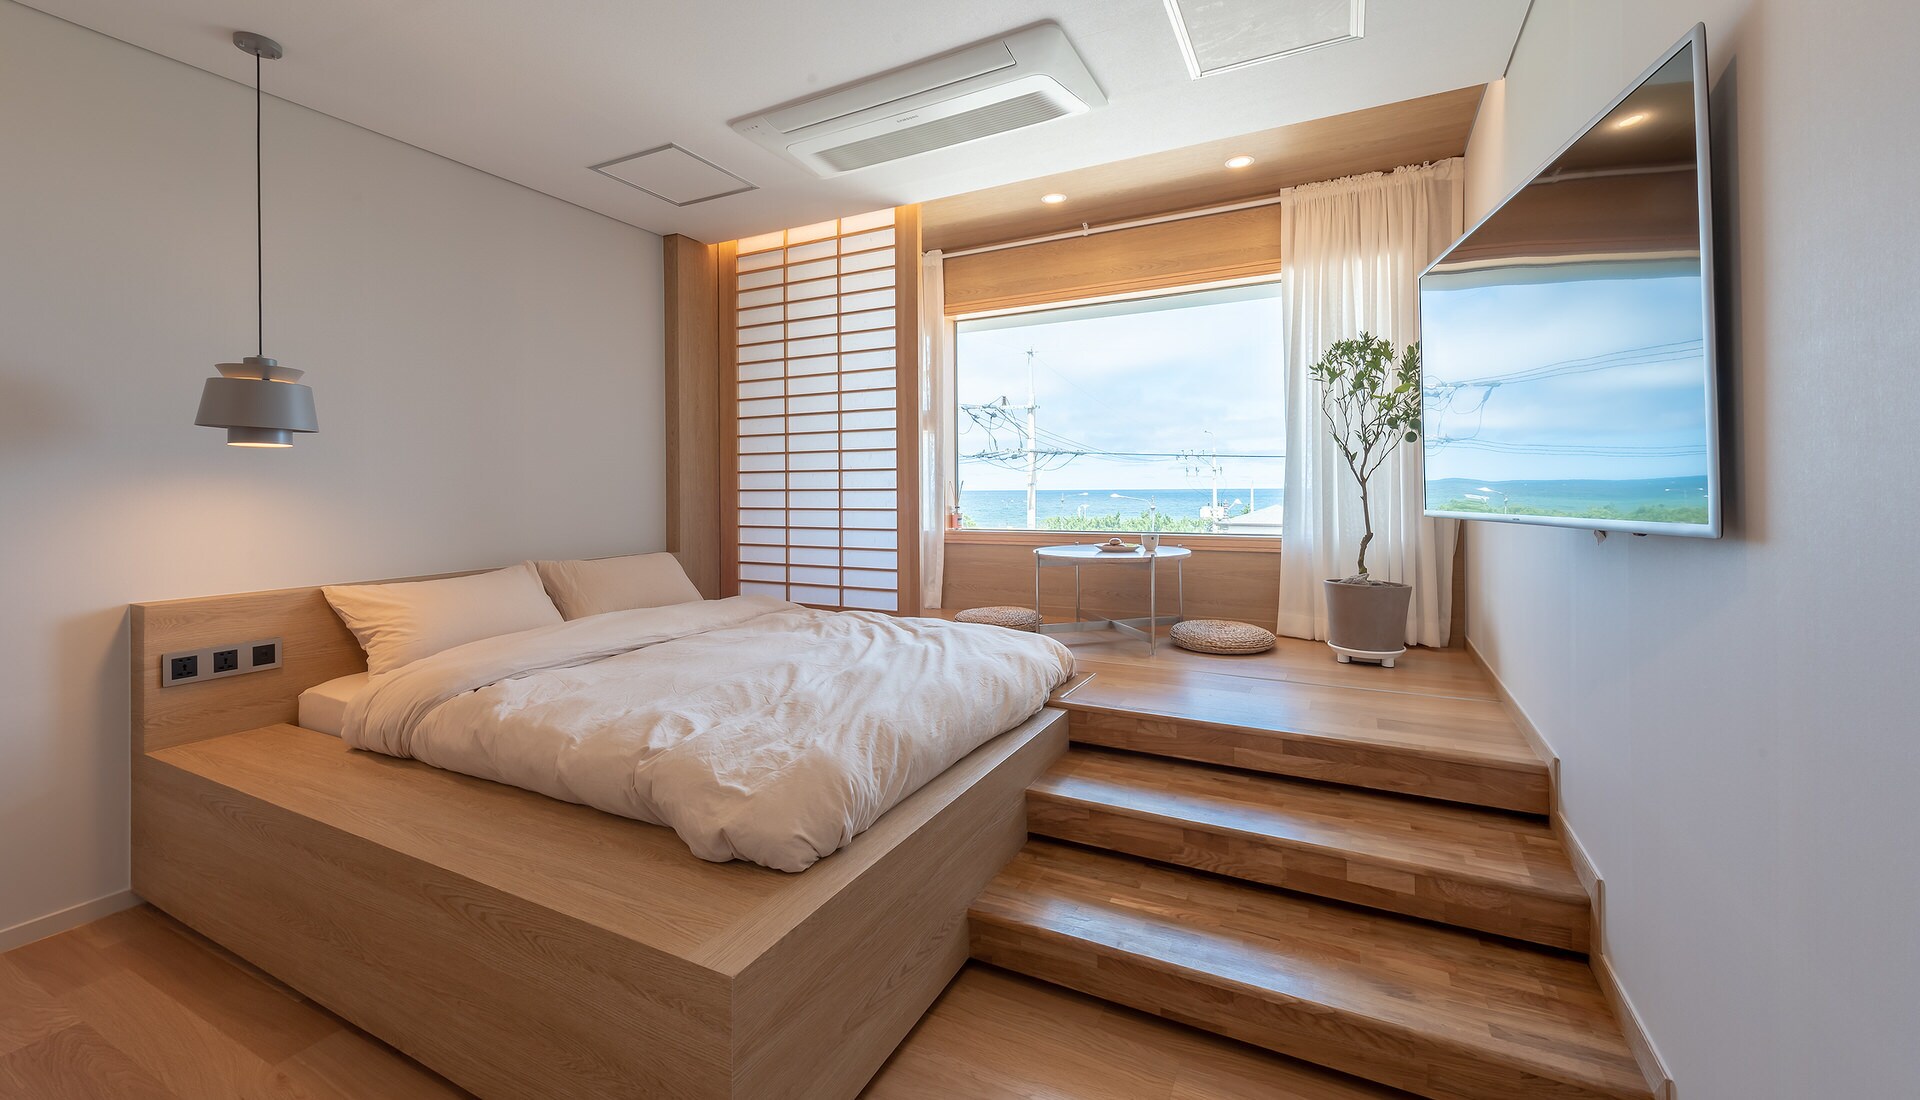 Property Image 1 -  cozy modern apartment with ocean view 302